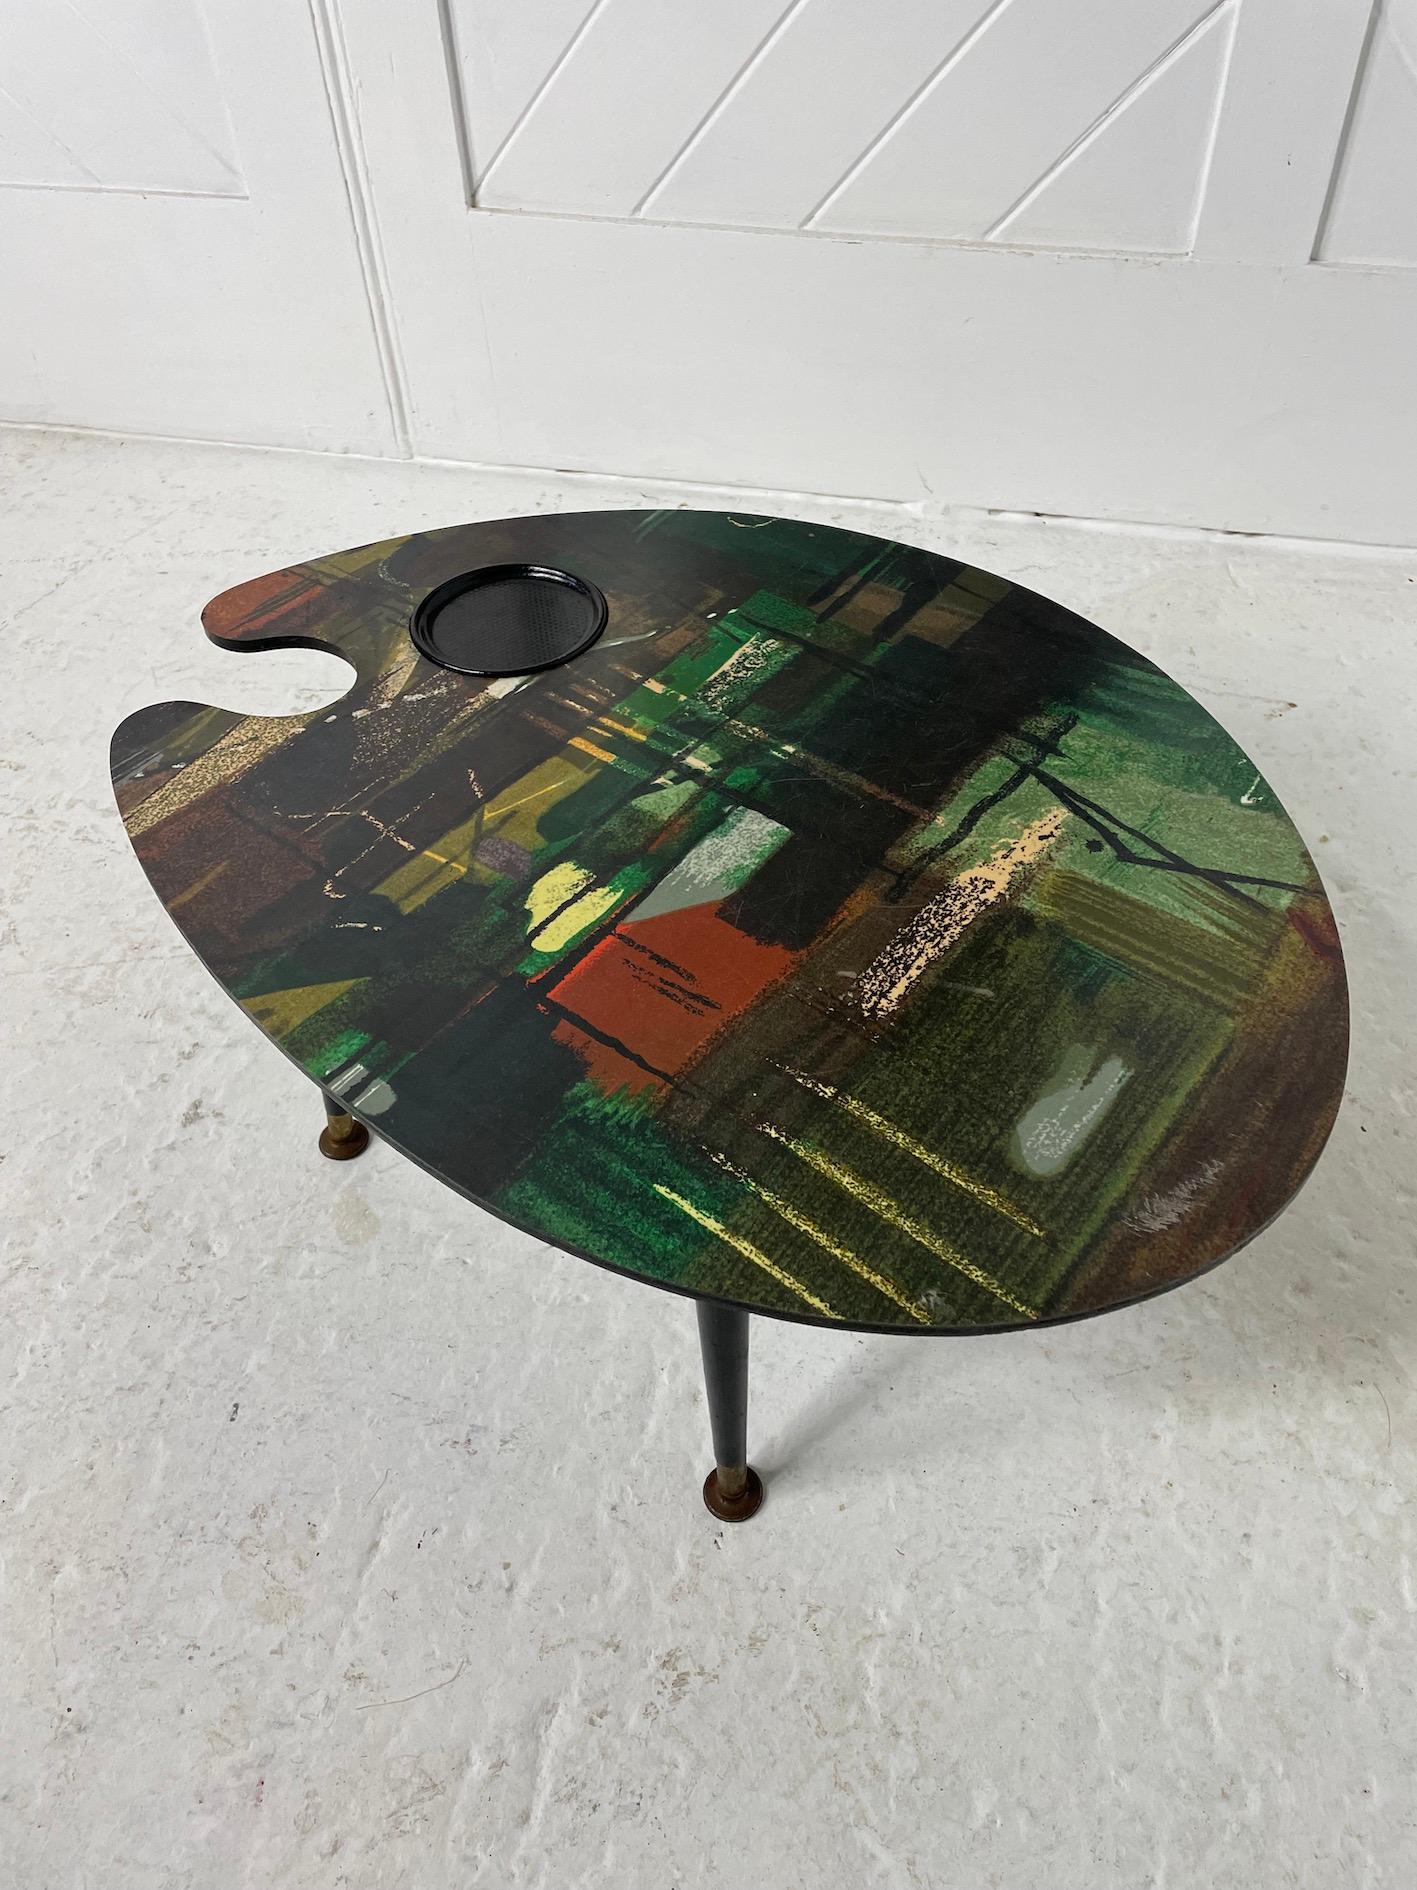 Sixties Palette Table After A Design By John Piper In Good Condition For Sale In Petworth, GB